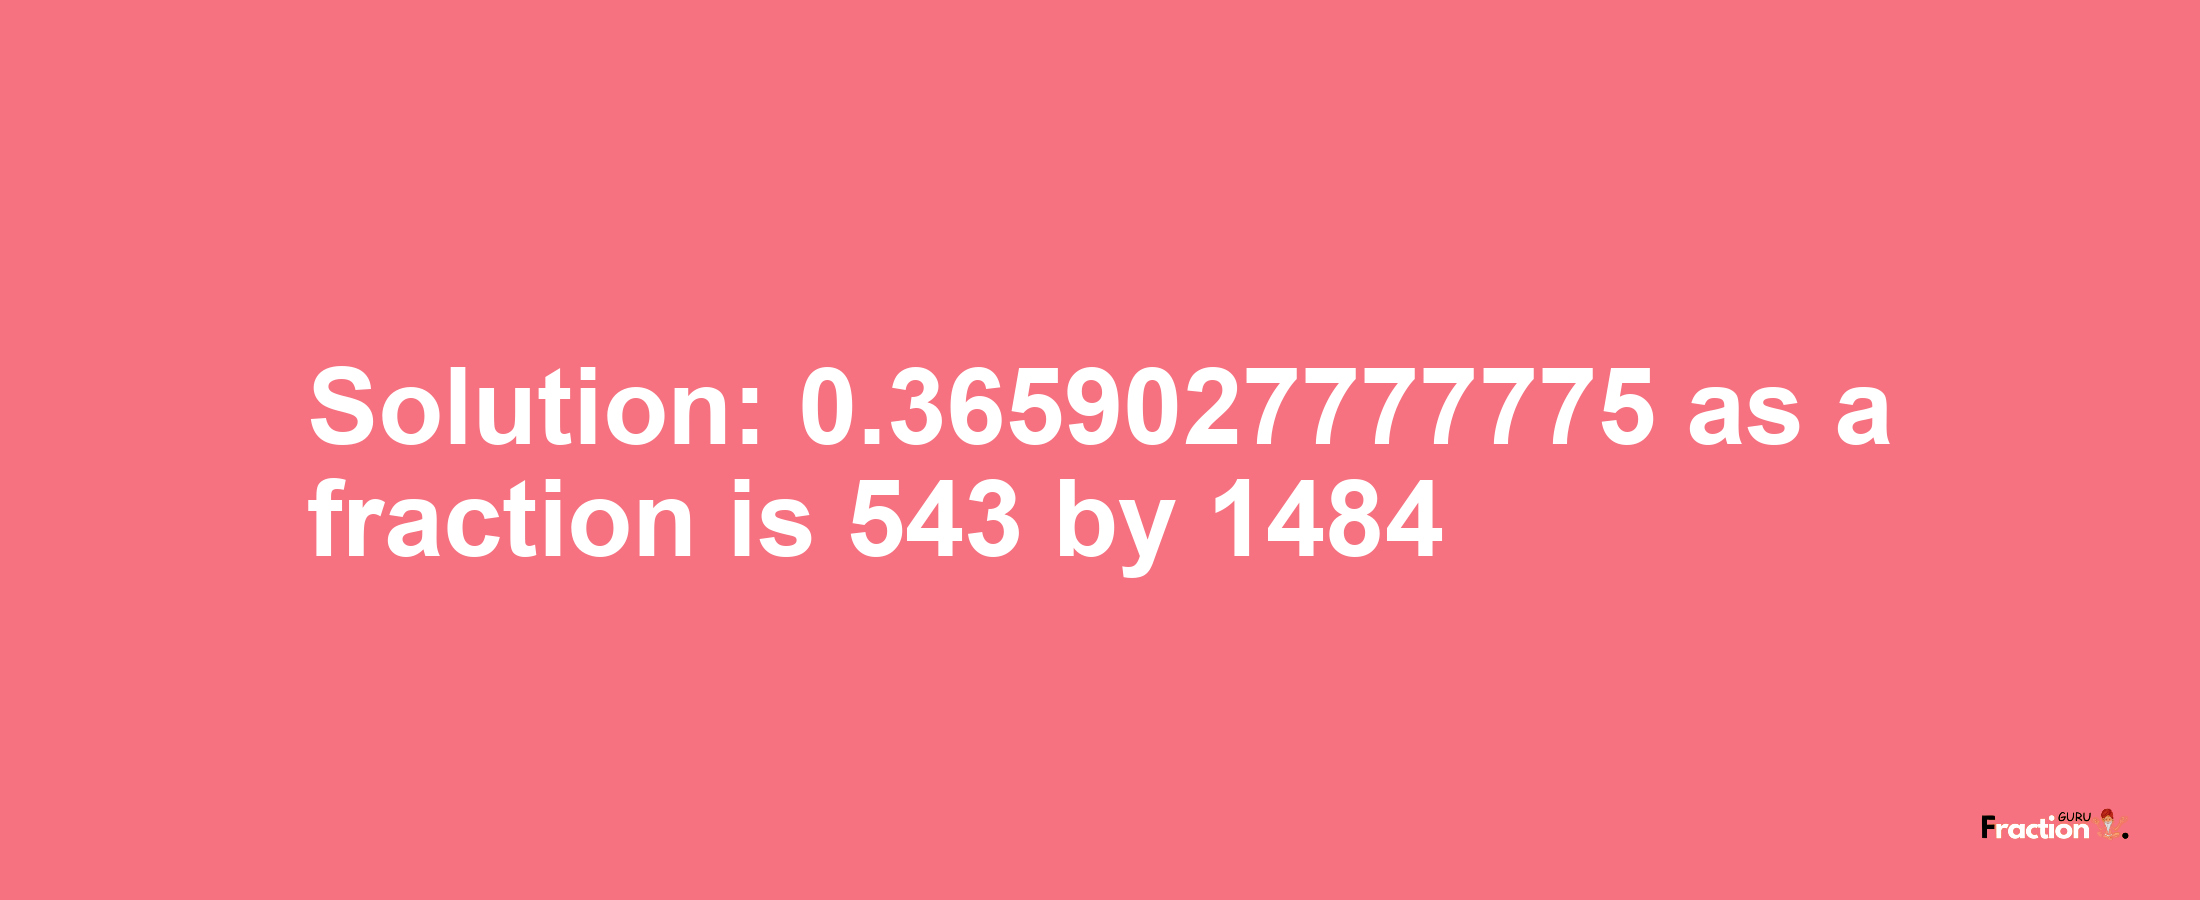 Solution:0.3659027777775 as a fraction is 543/1484